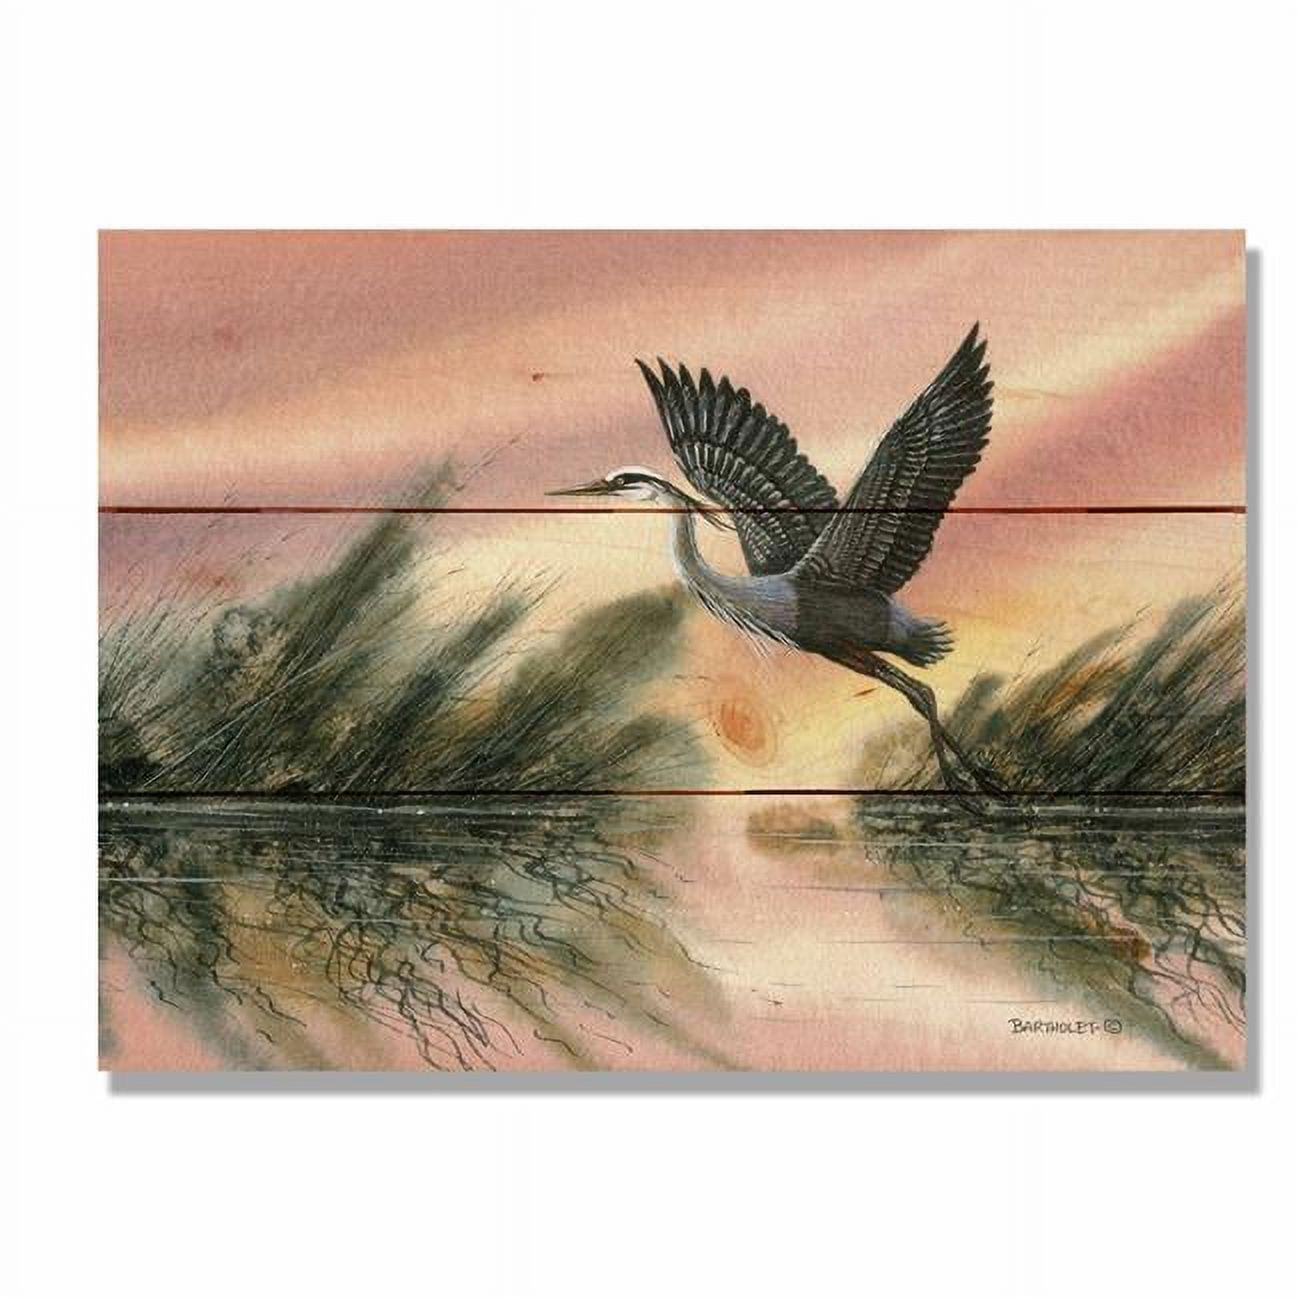 Day Dream Dbcm1511 15 X 11 In. Bartholets Cool Of The Morning Wall Art